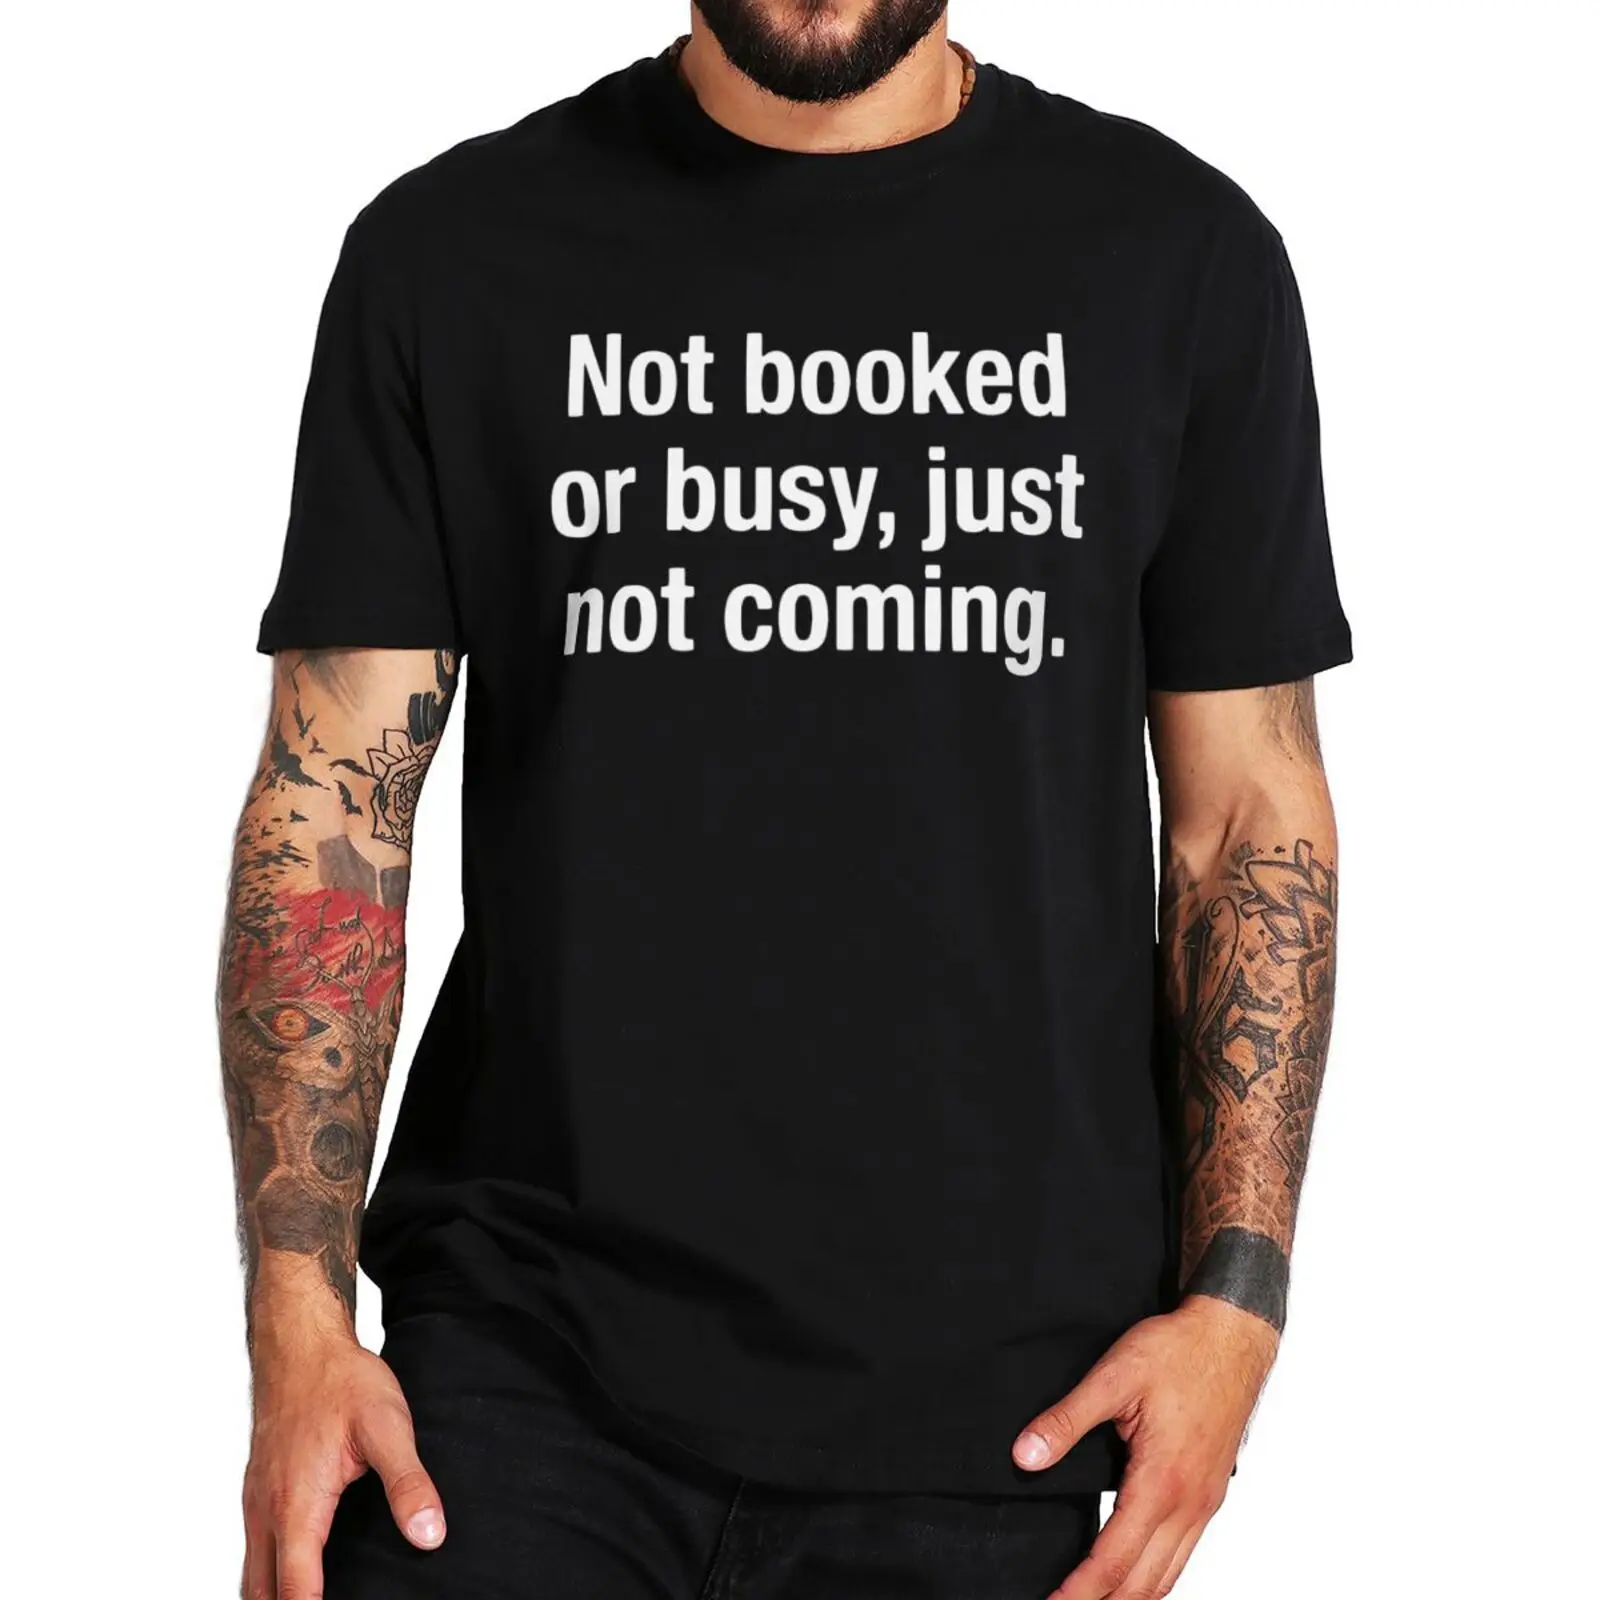 

Not Booked Or Busy Just Not Coming T Shirt Funny Saying Sarcastic Humor Short Sleeve 100% Cotton Unisex Summer Soft T-shirts